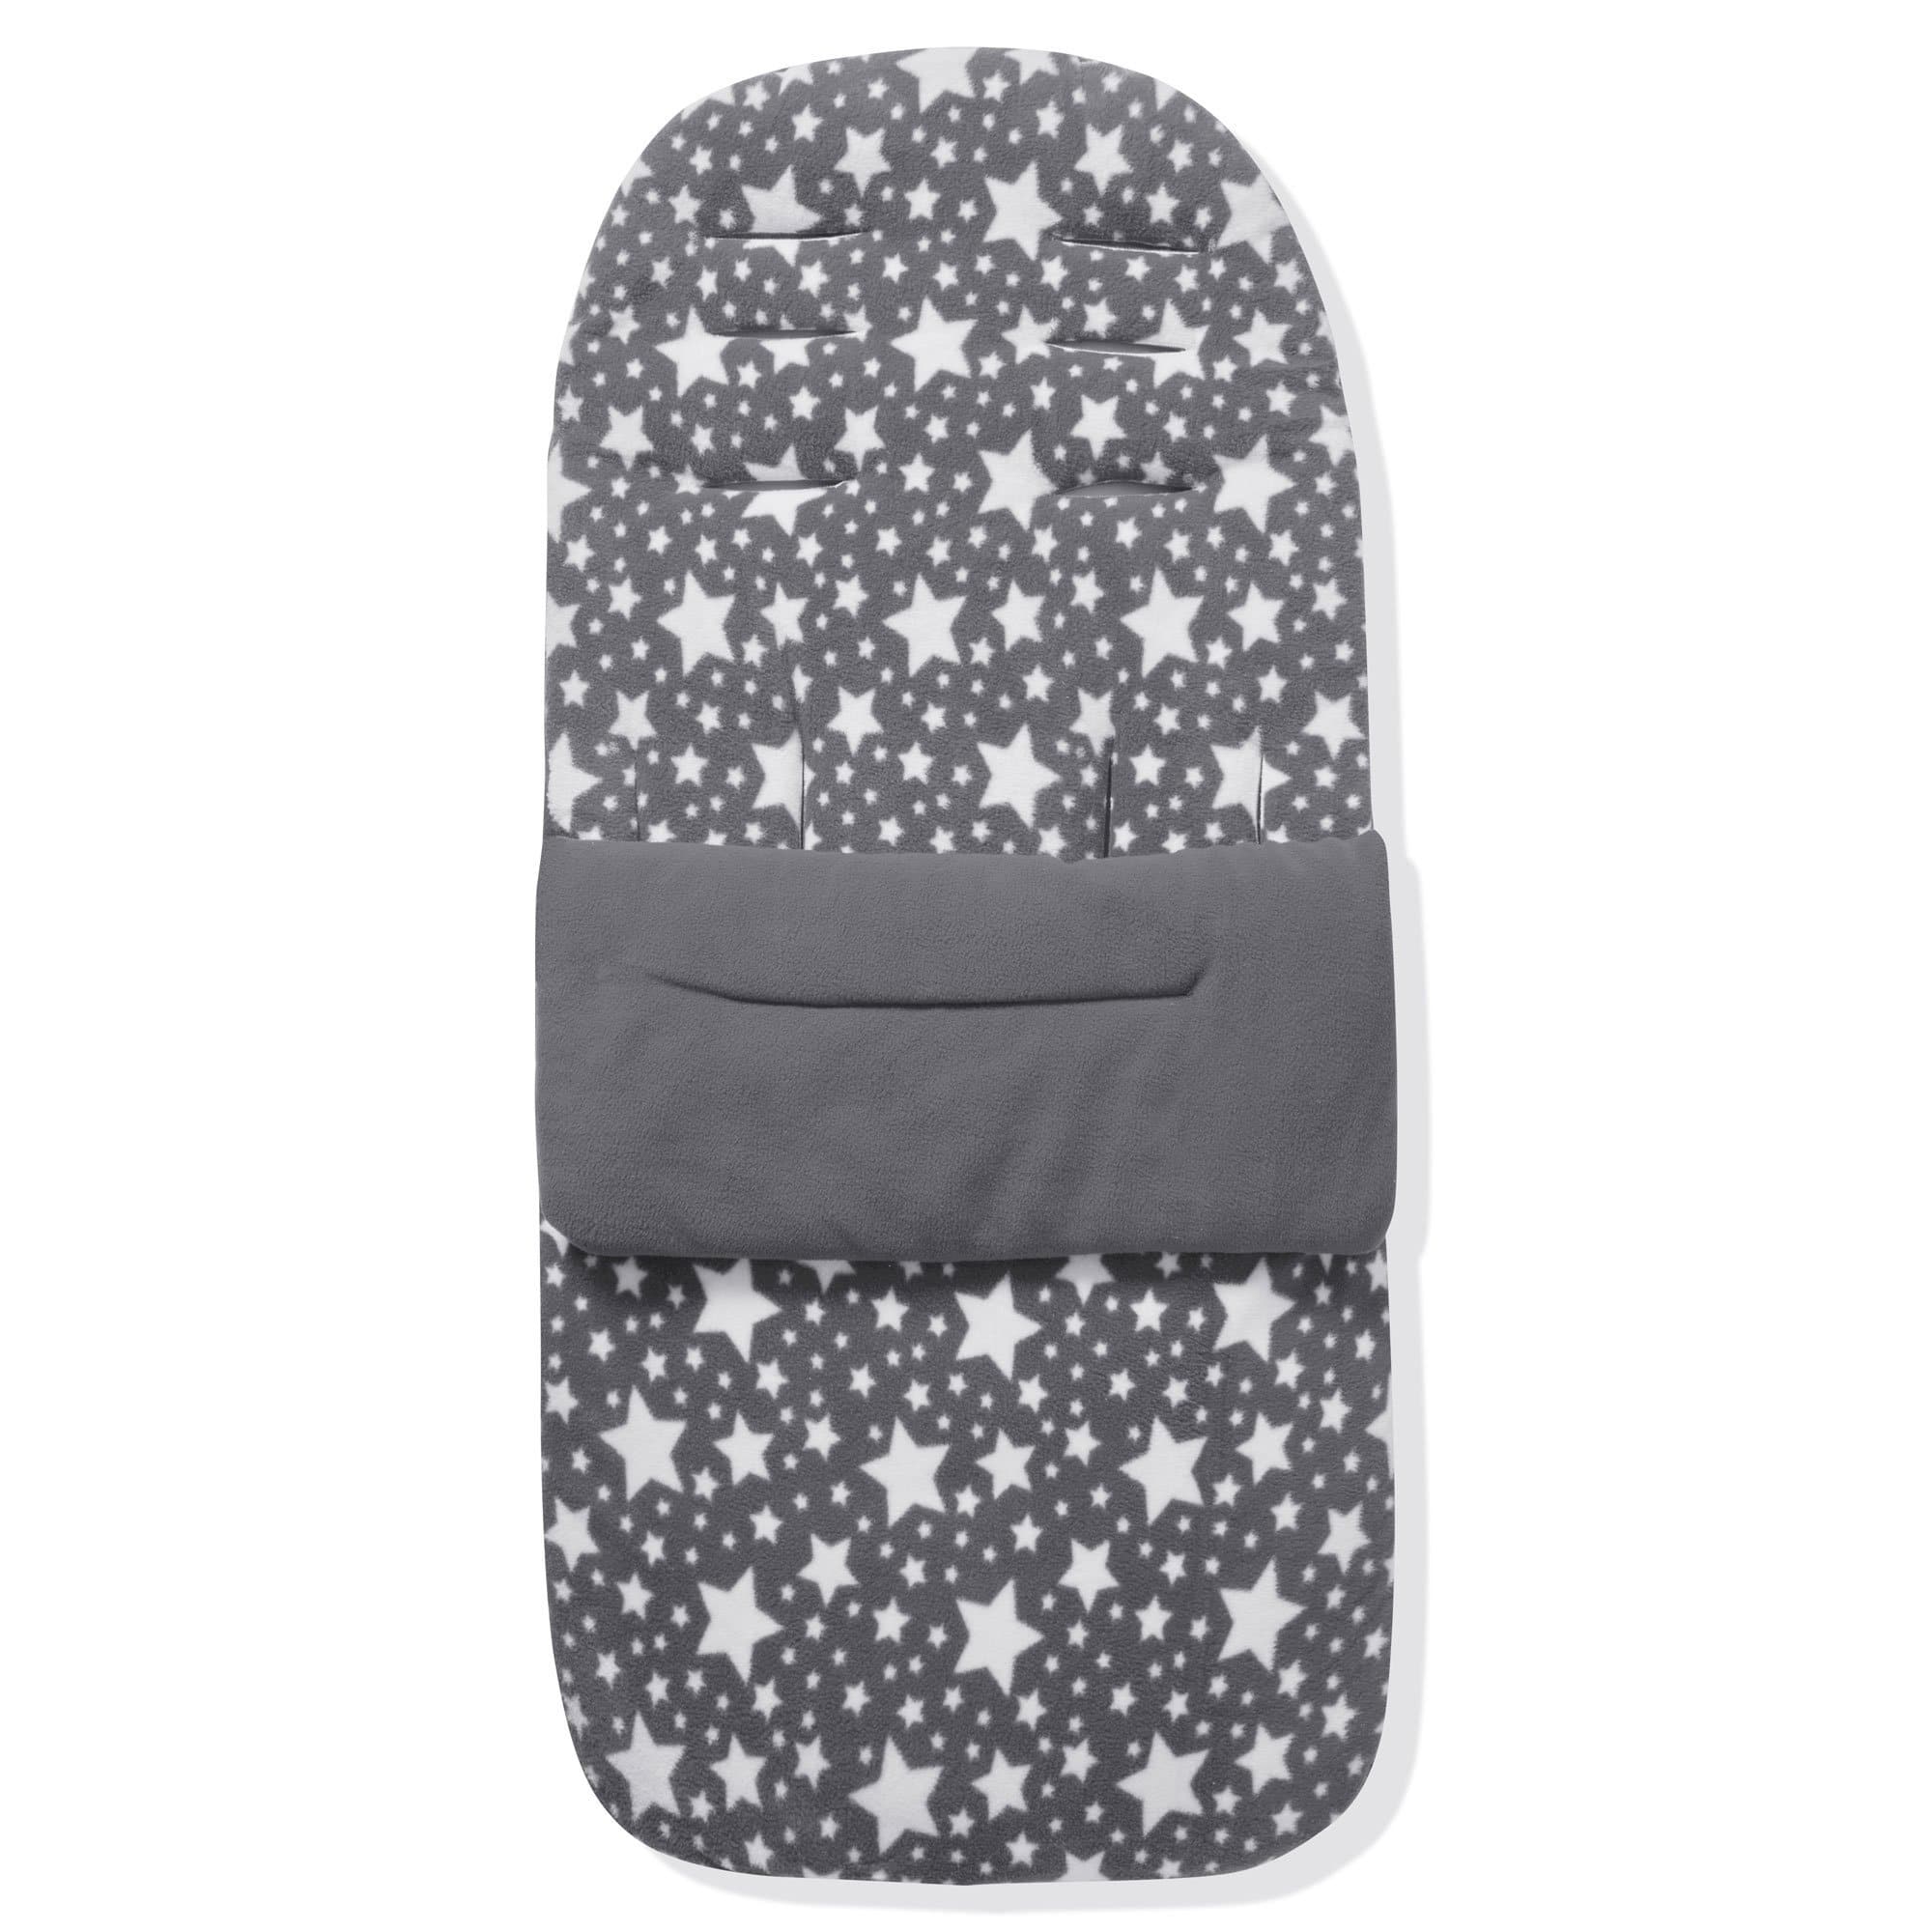 Fleece Footmuff / Cosy Toes Compatible with Little Shield - Grey Star / Fits All Models | For Your Little One